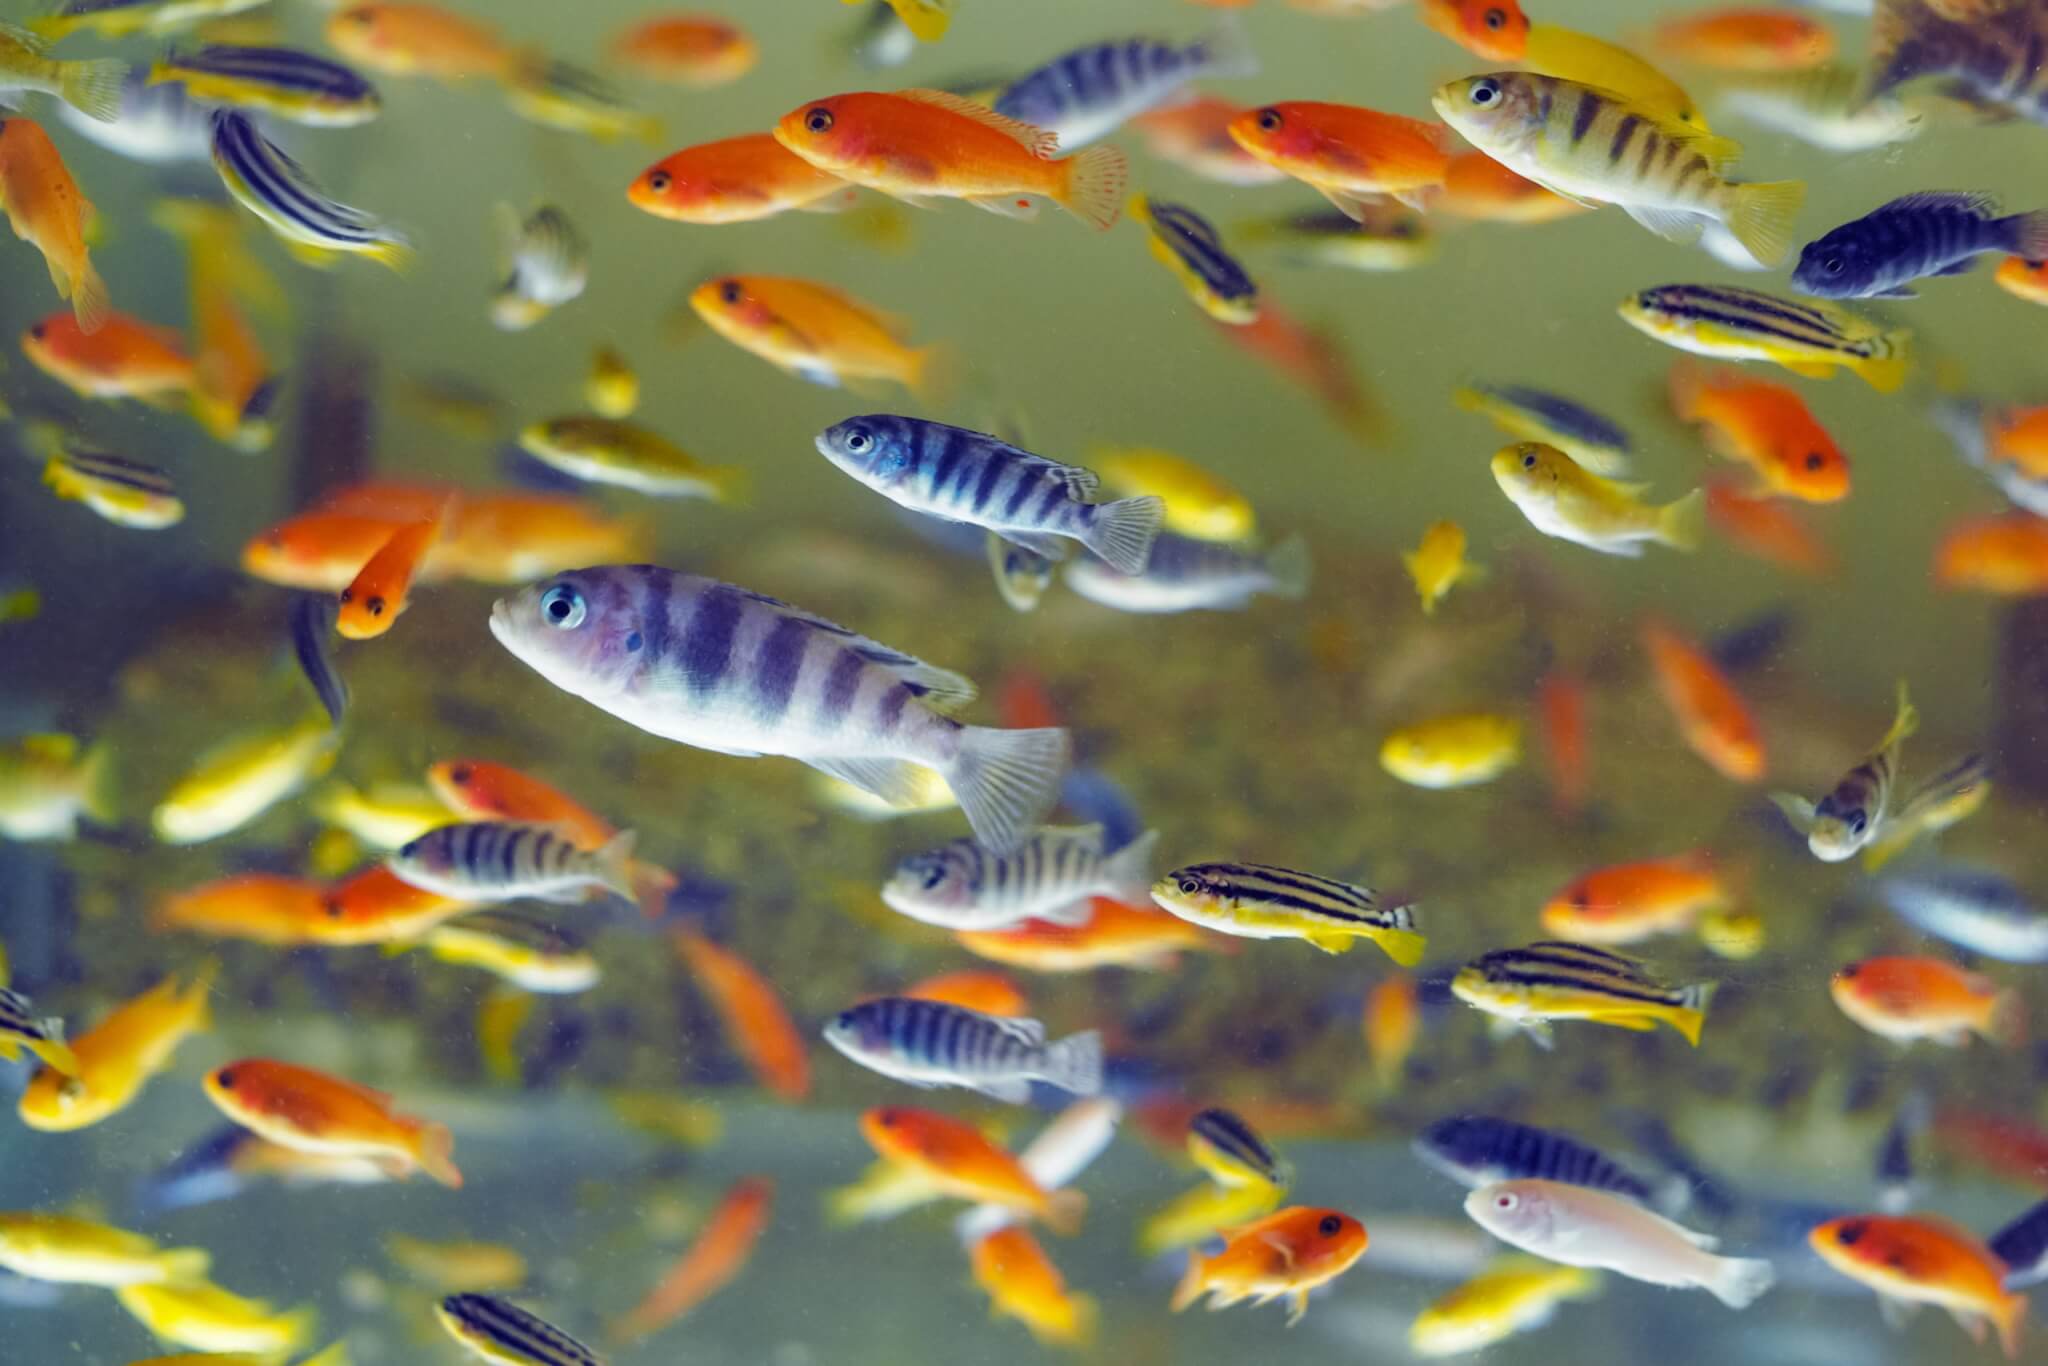 Can These Fish Do Math?  The Scientist Magazine®